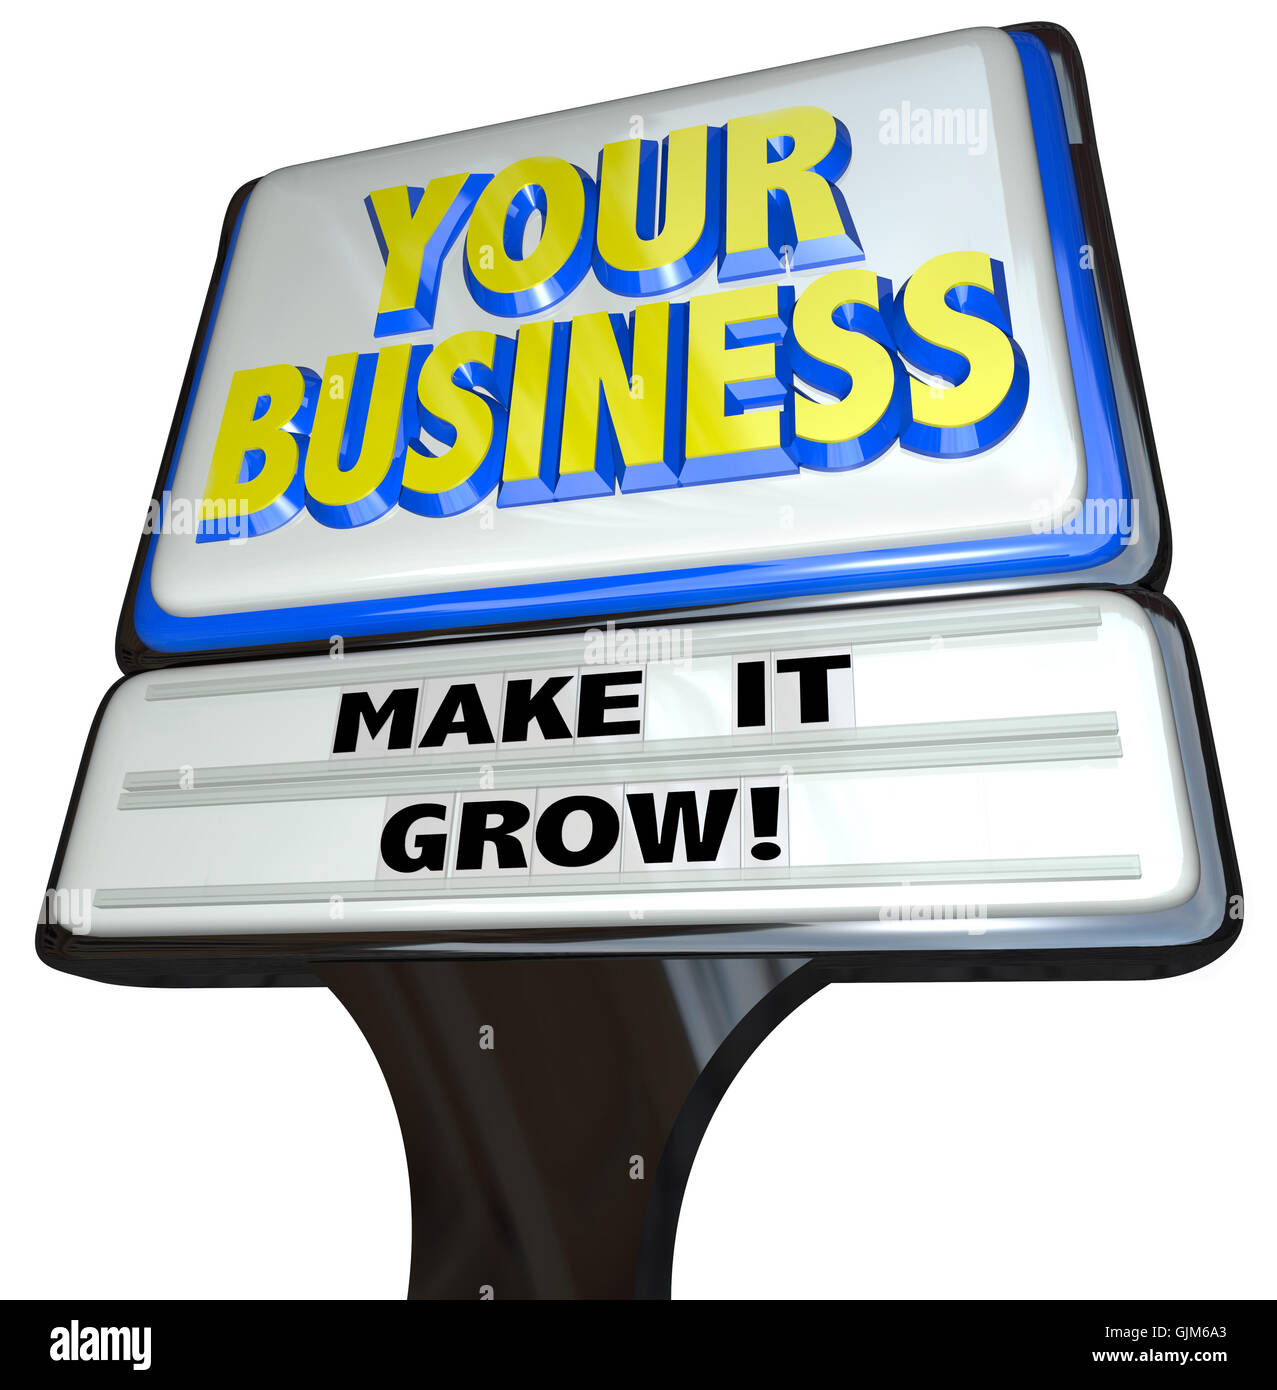 Restaurant Sign - Your Business Make it Grow Stock Photo